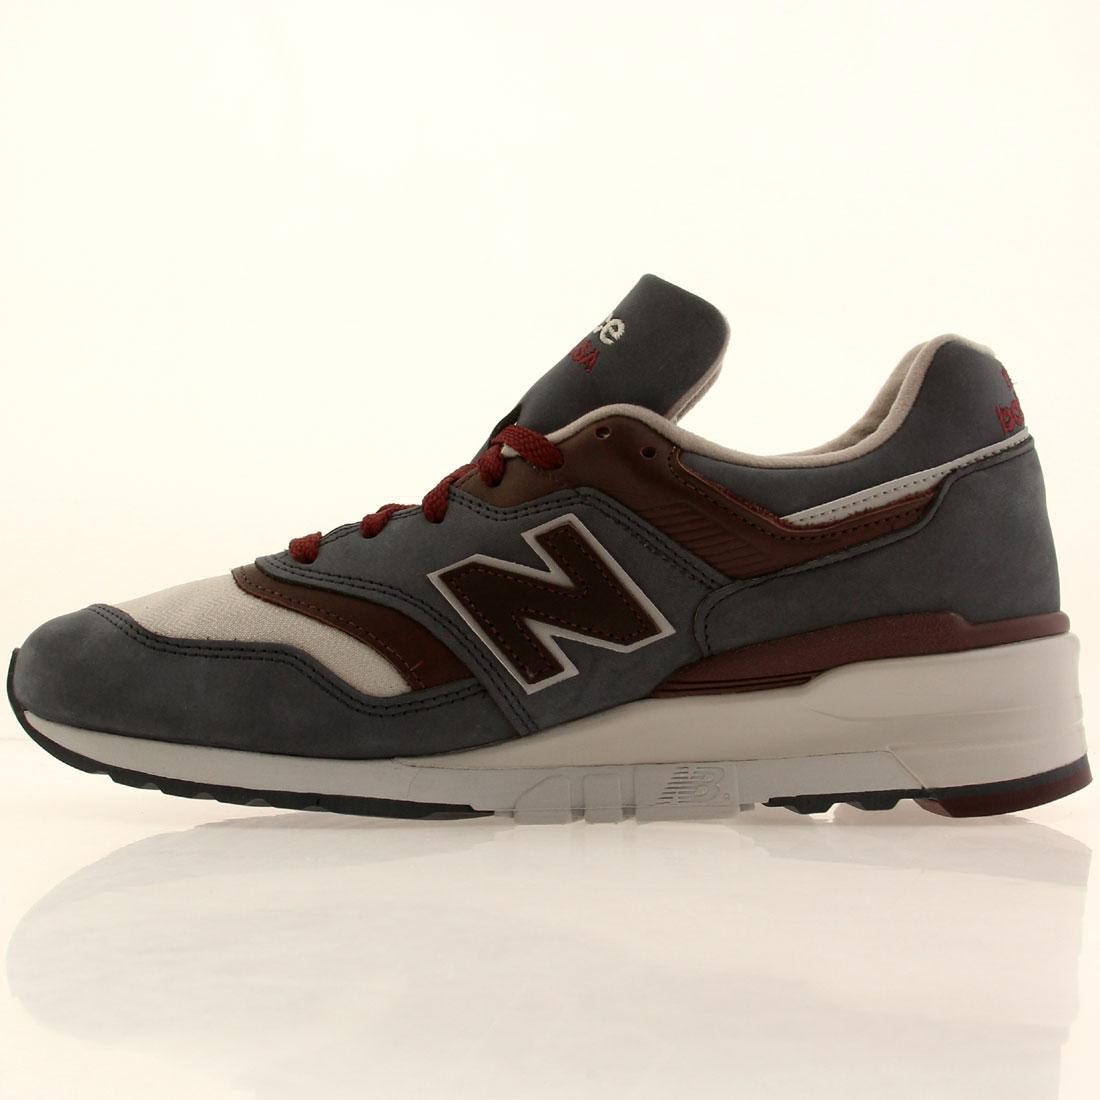 New Balance Men M997DGM - Made In USA - Horween Leather (gray / maroon)